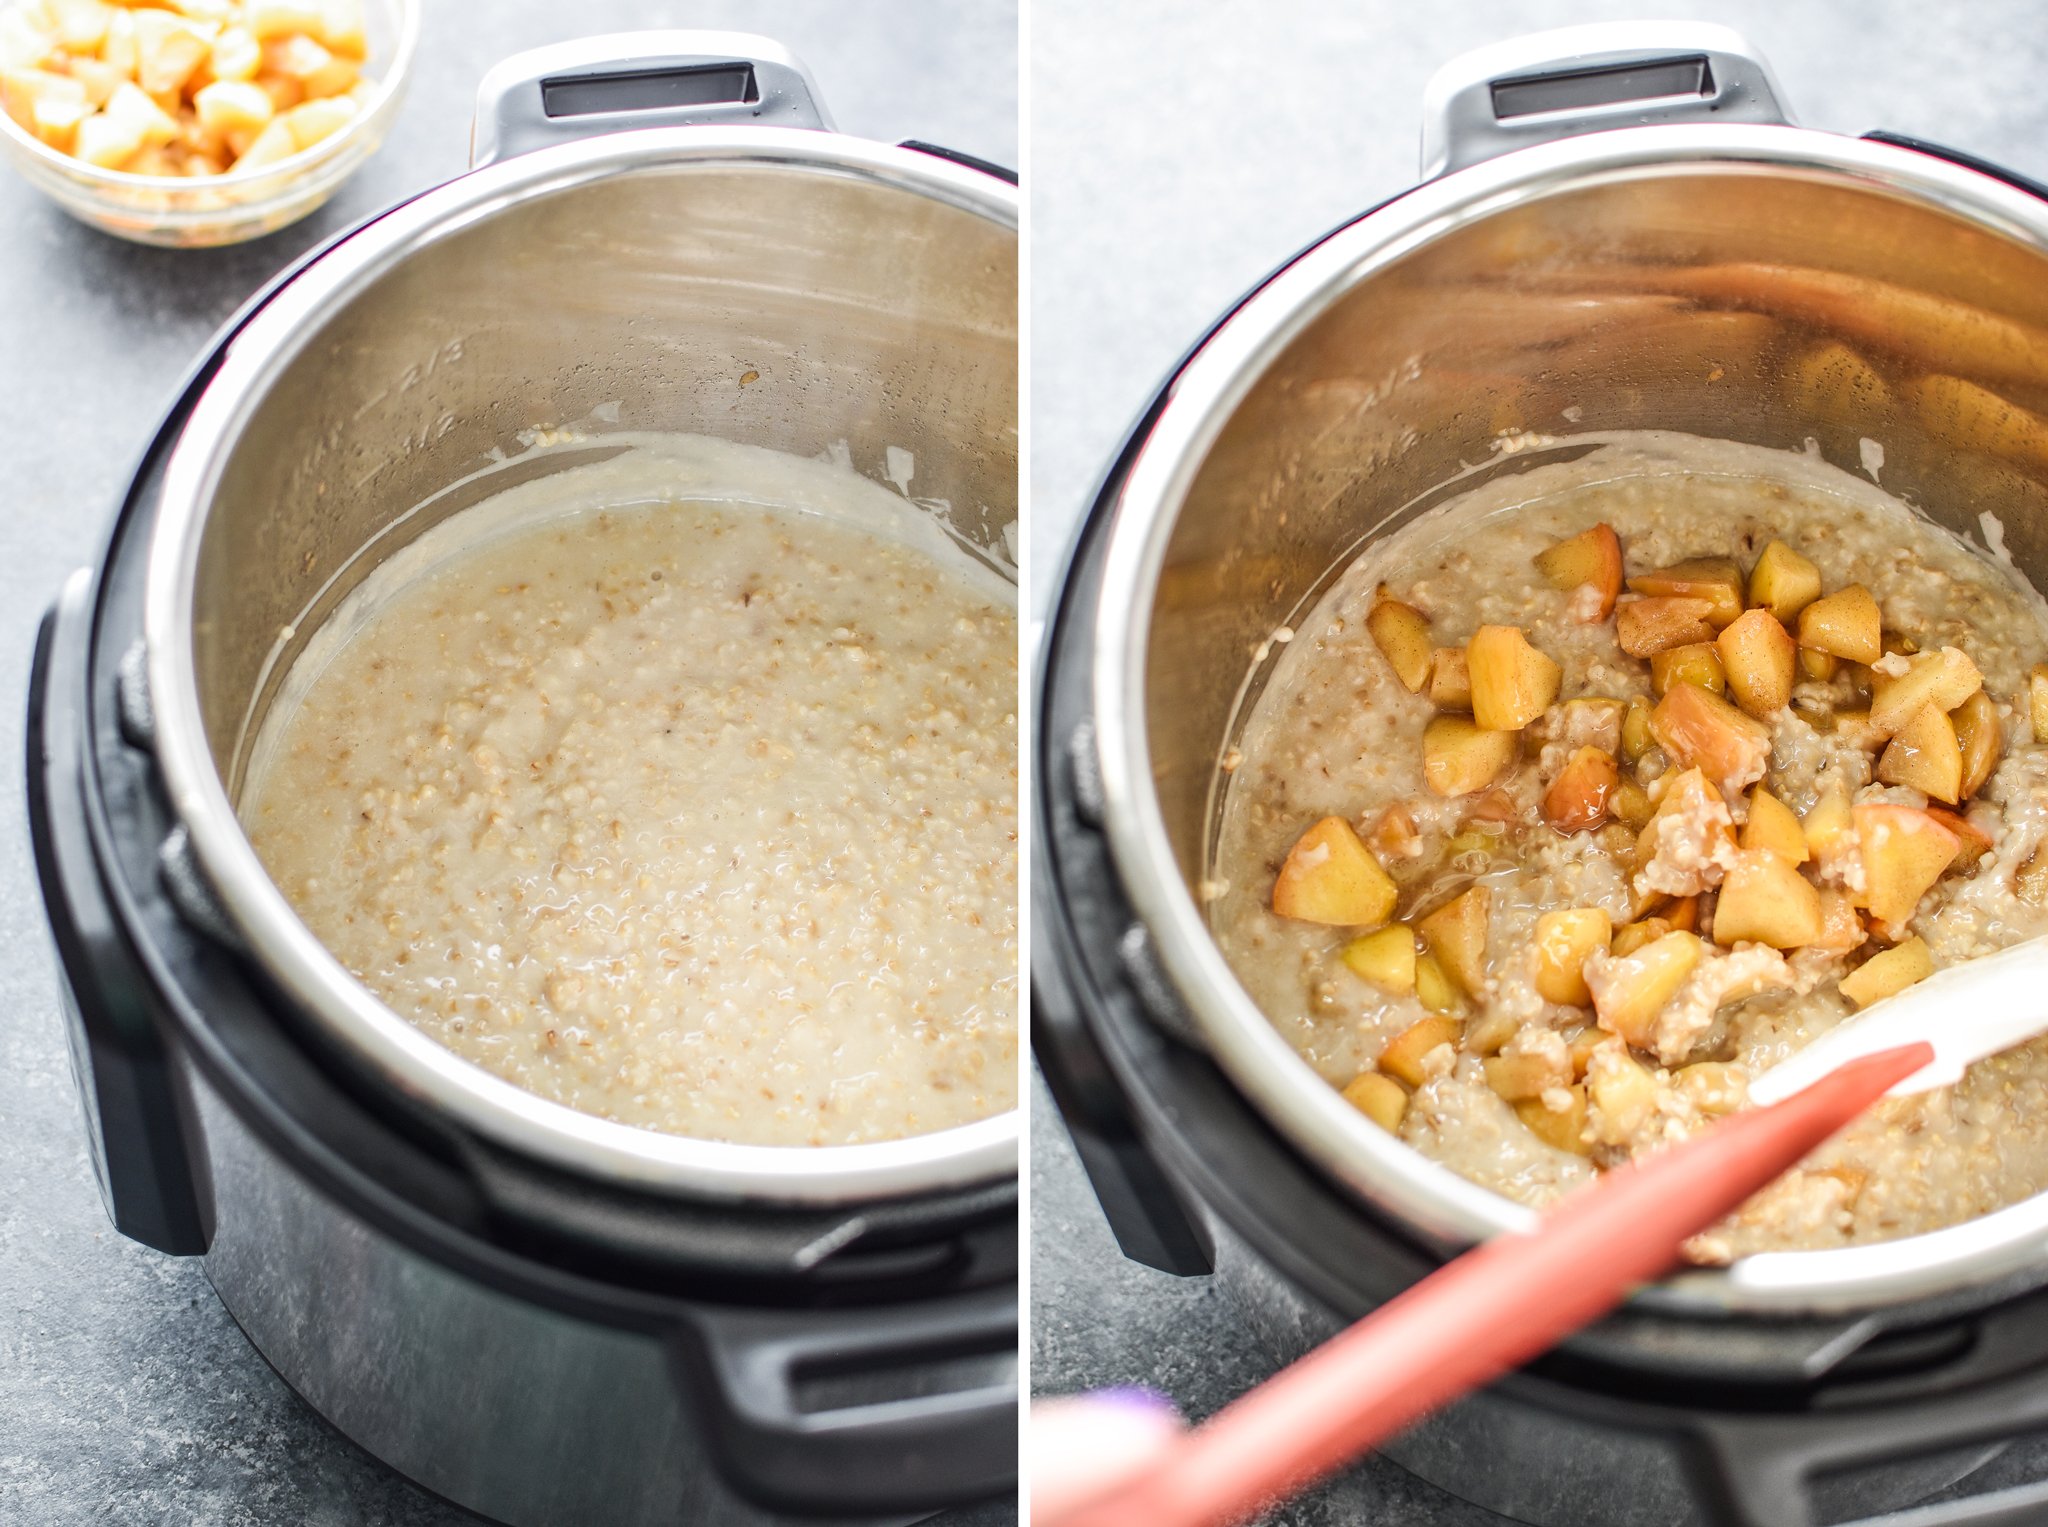 Making cinnamon apple steel cut oats in my Instant Pot - Here are The First 25 Recipes I Made With My Instant Pot